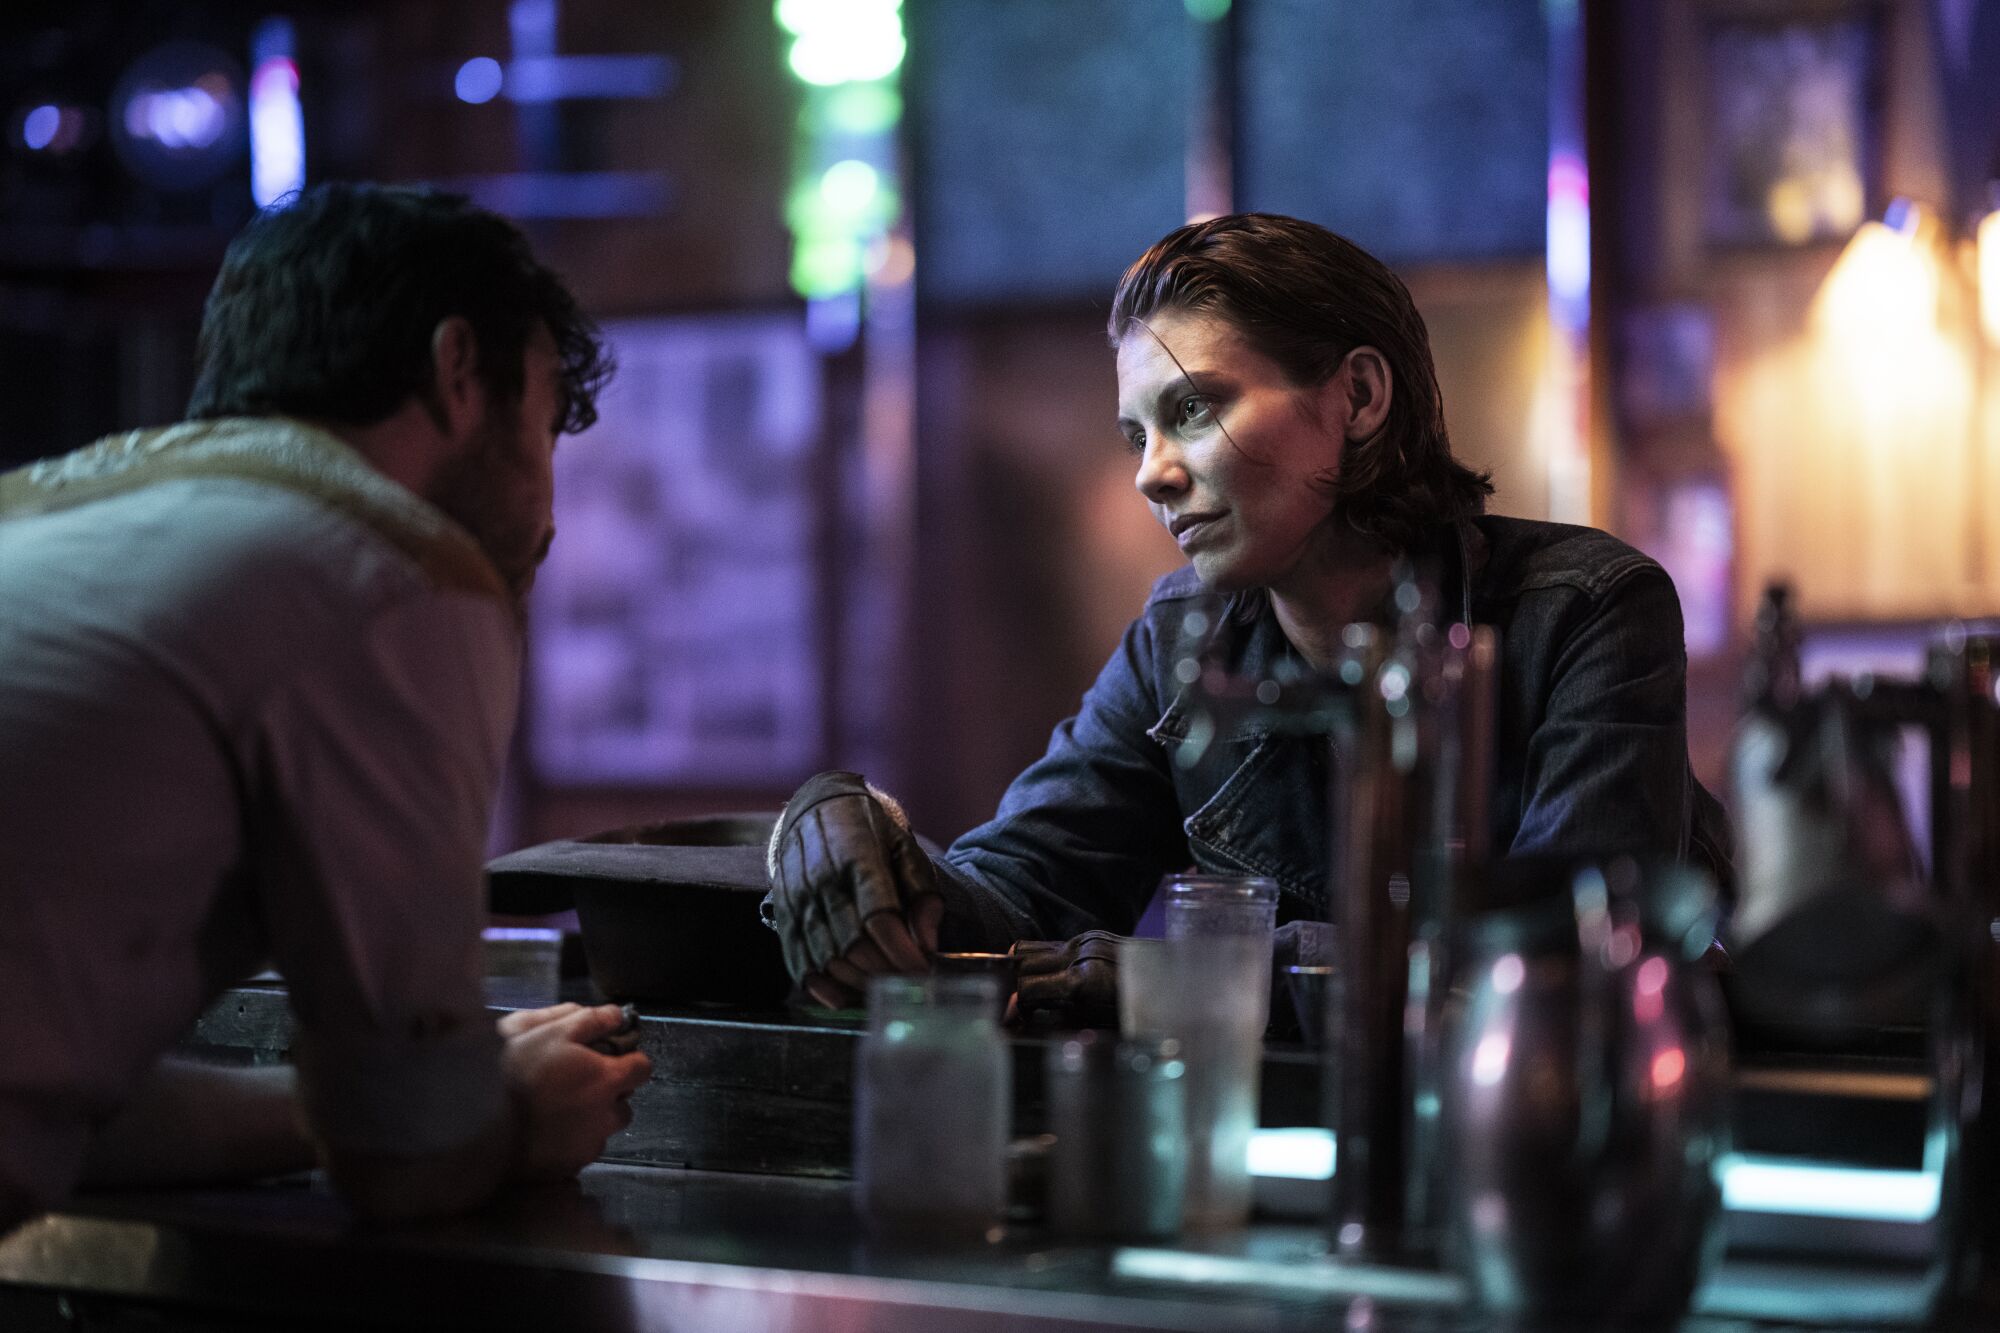 A woman sitting at a bar looks at the bartender who is leaning toward her.